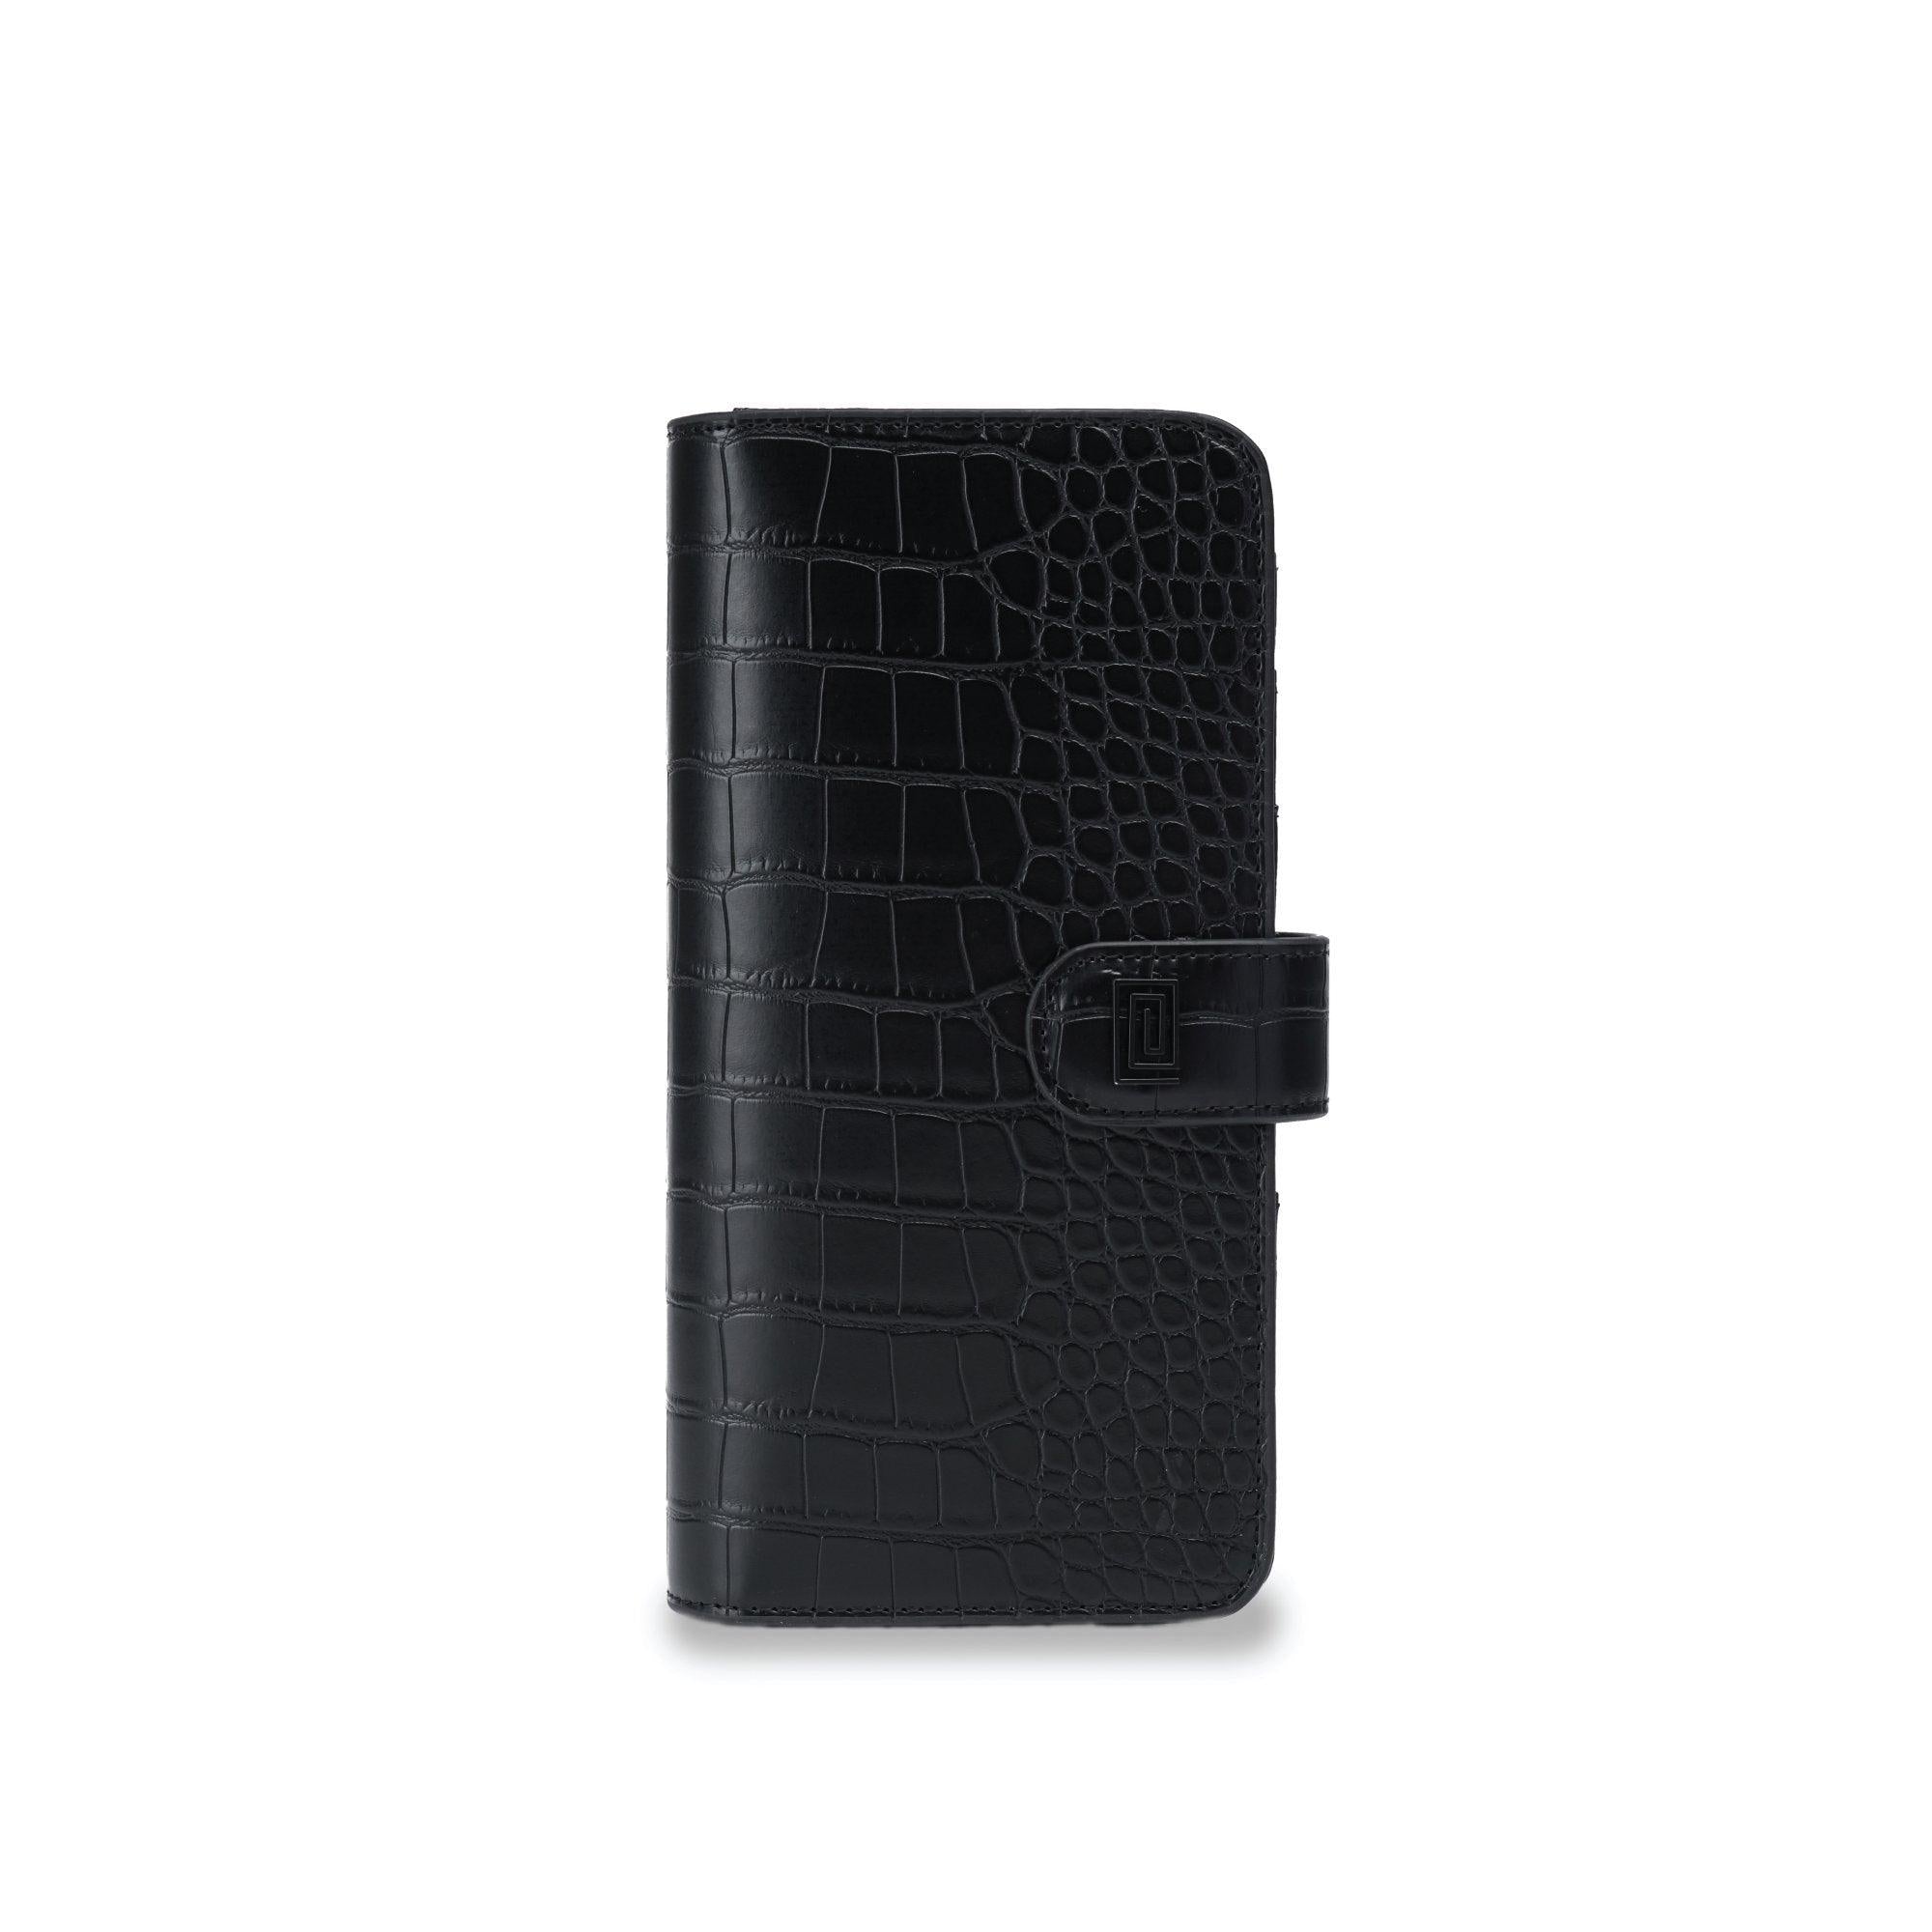 MASQ Croco Slim Compact | OUTLET | SL5. Slim Compact Wallet Ringless Agenda | Wallet Planner Cover | Final Sale | NOTIQ